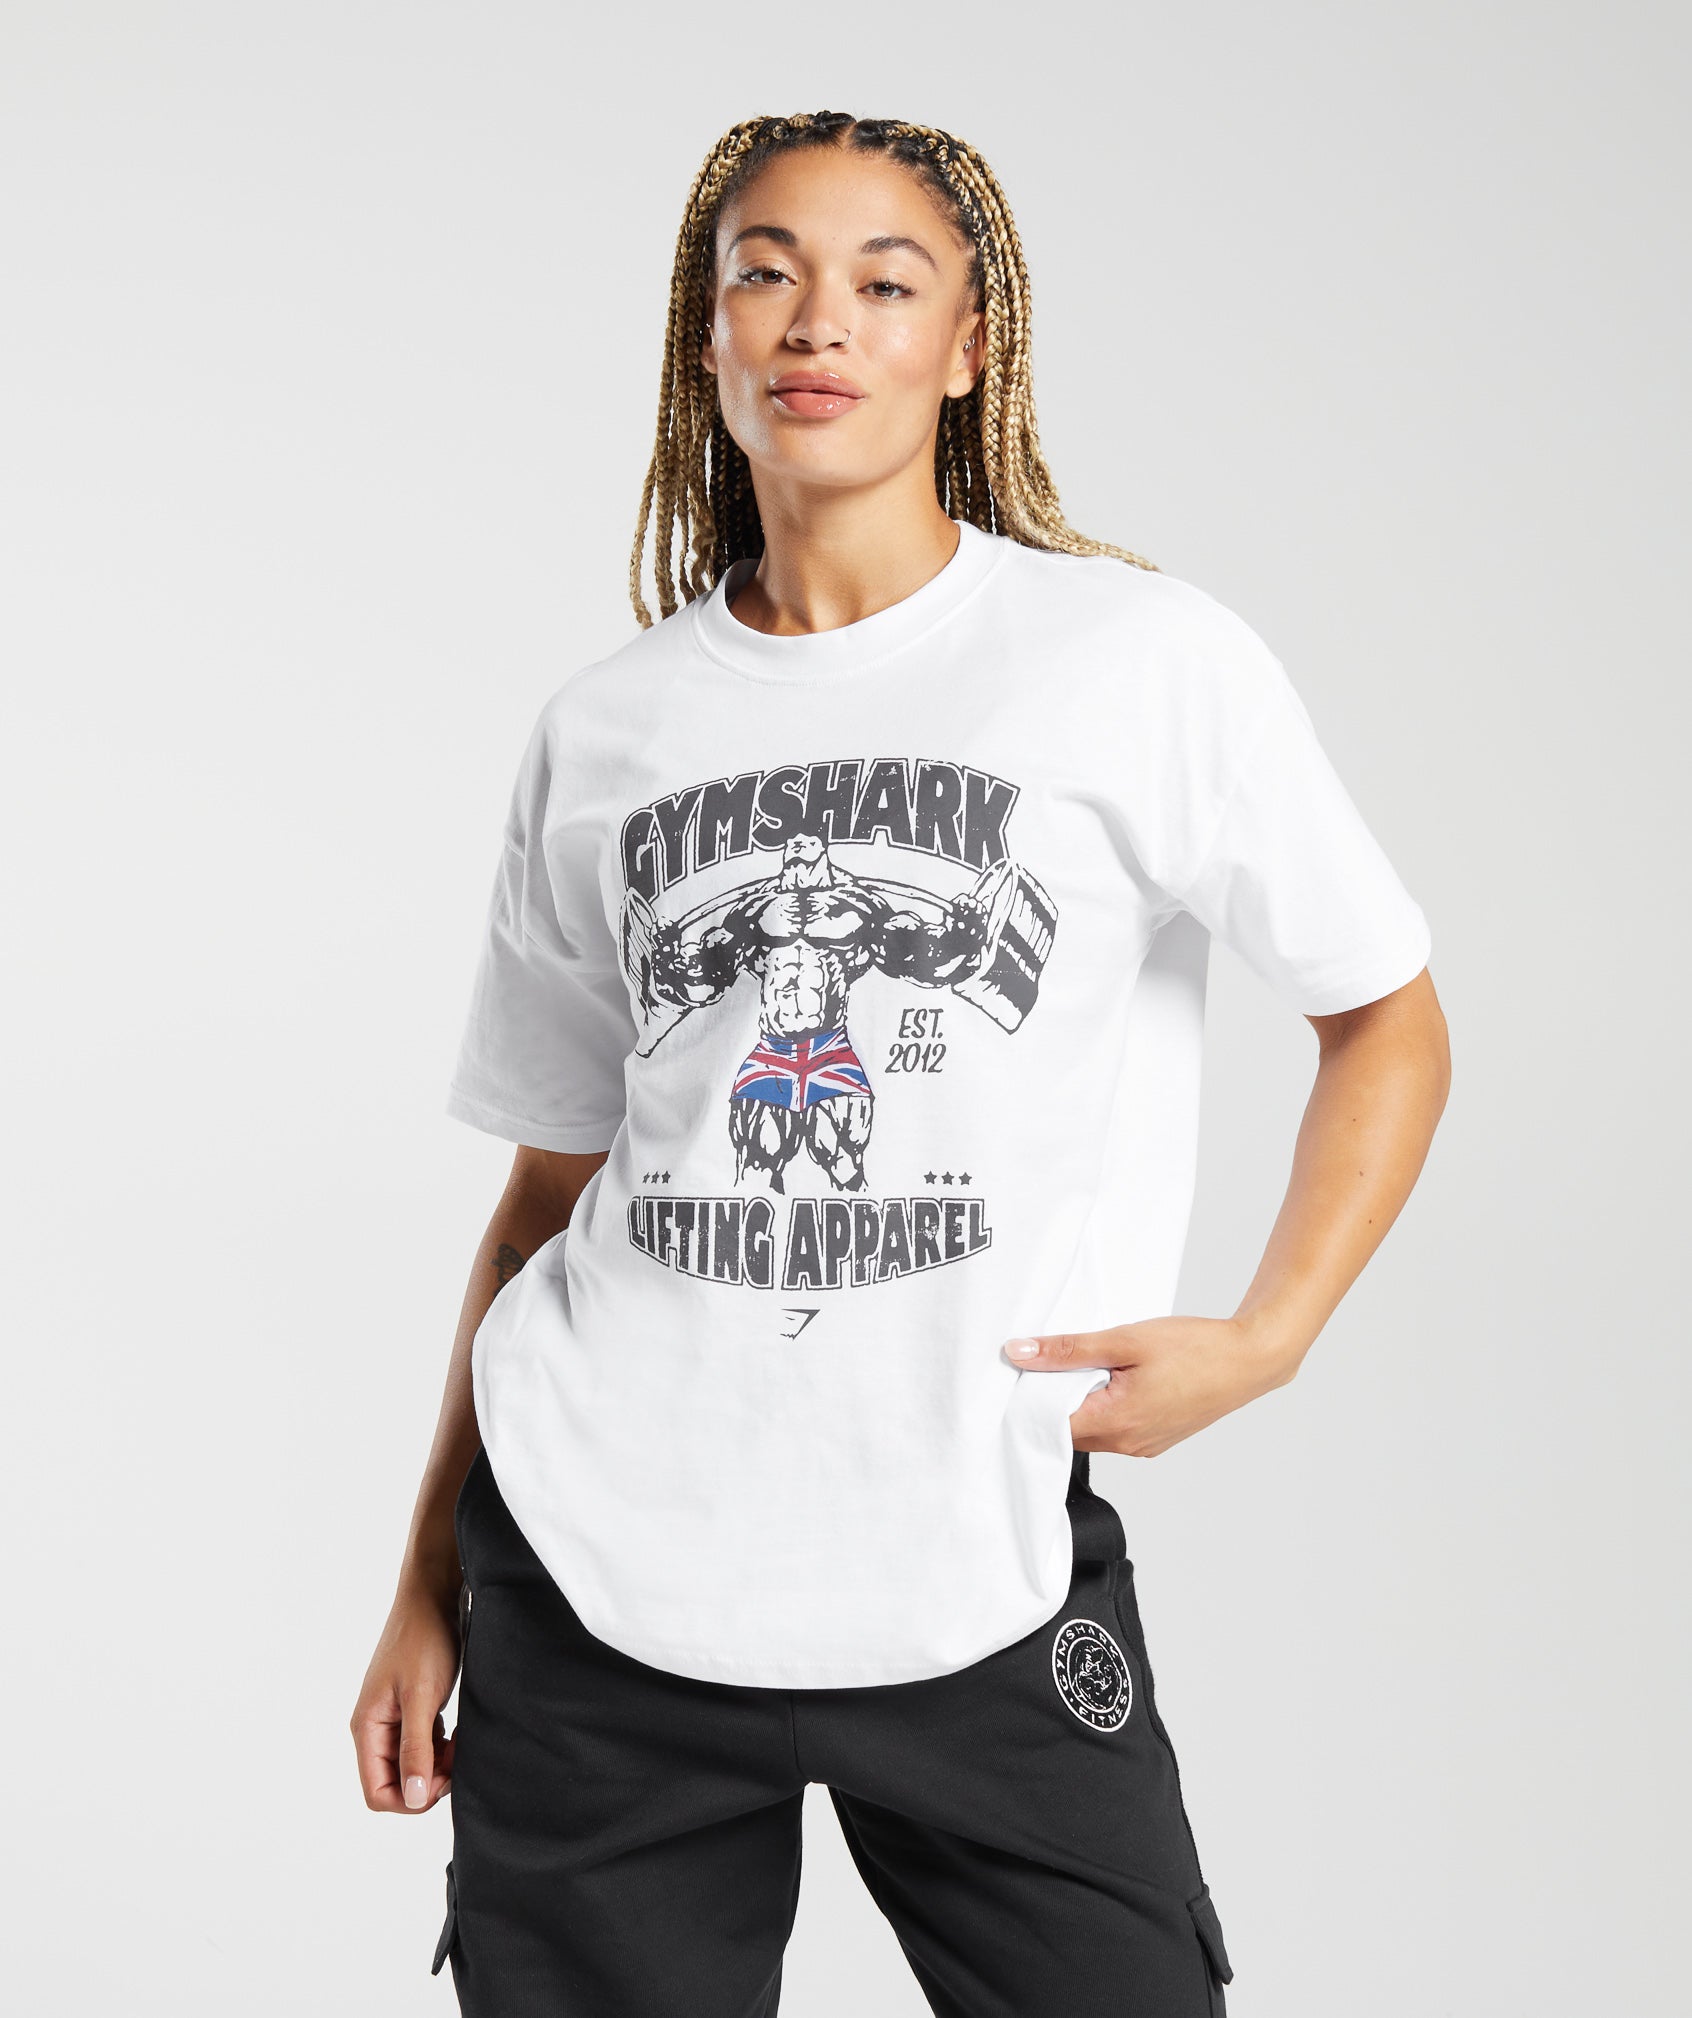 Lifting Apparel Oversized T-Shirt in White - view 1